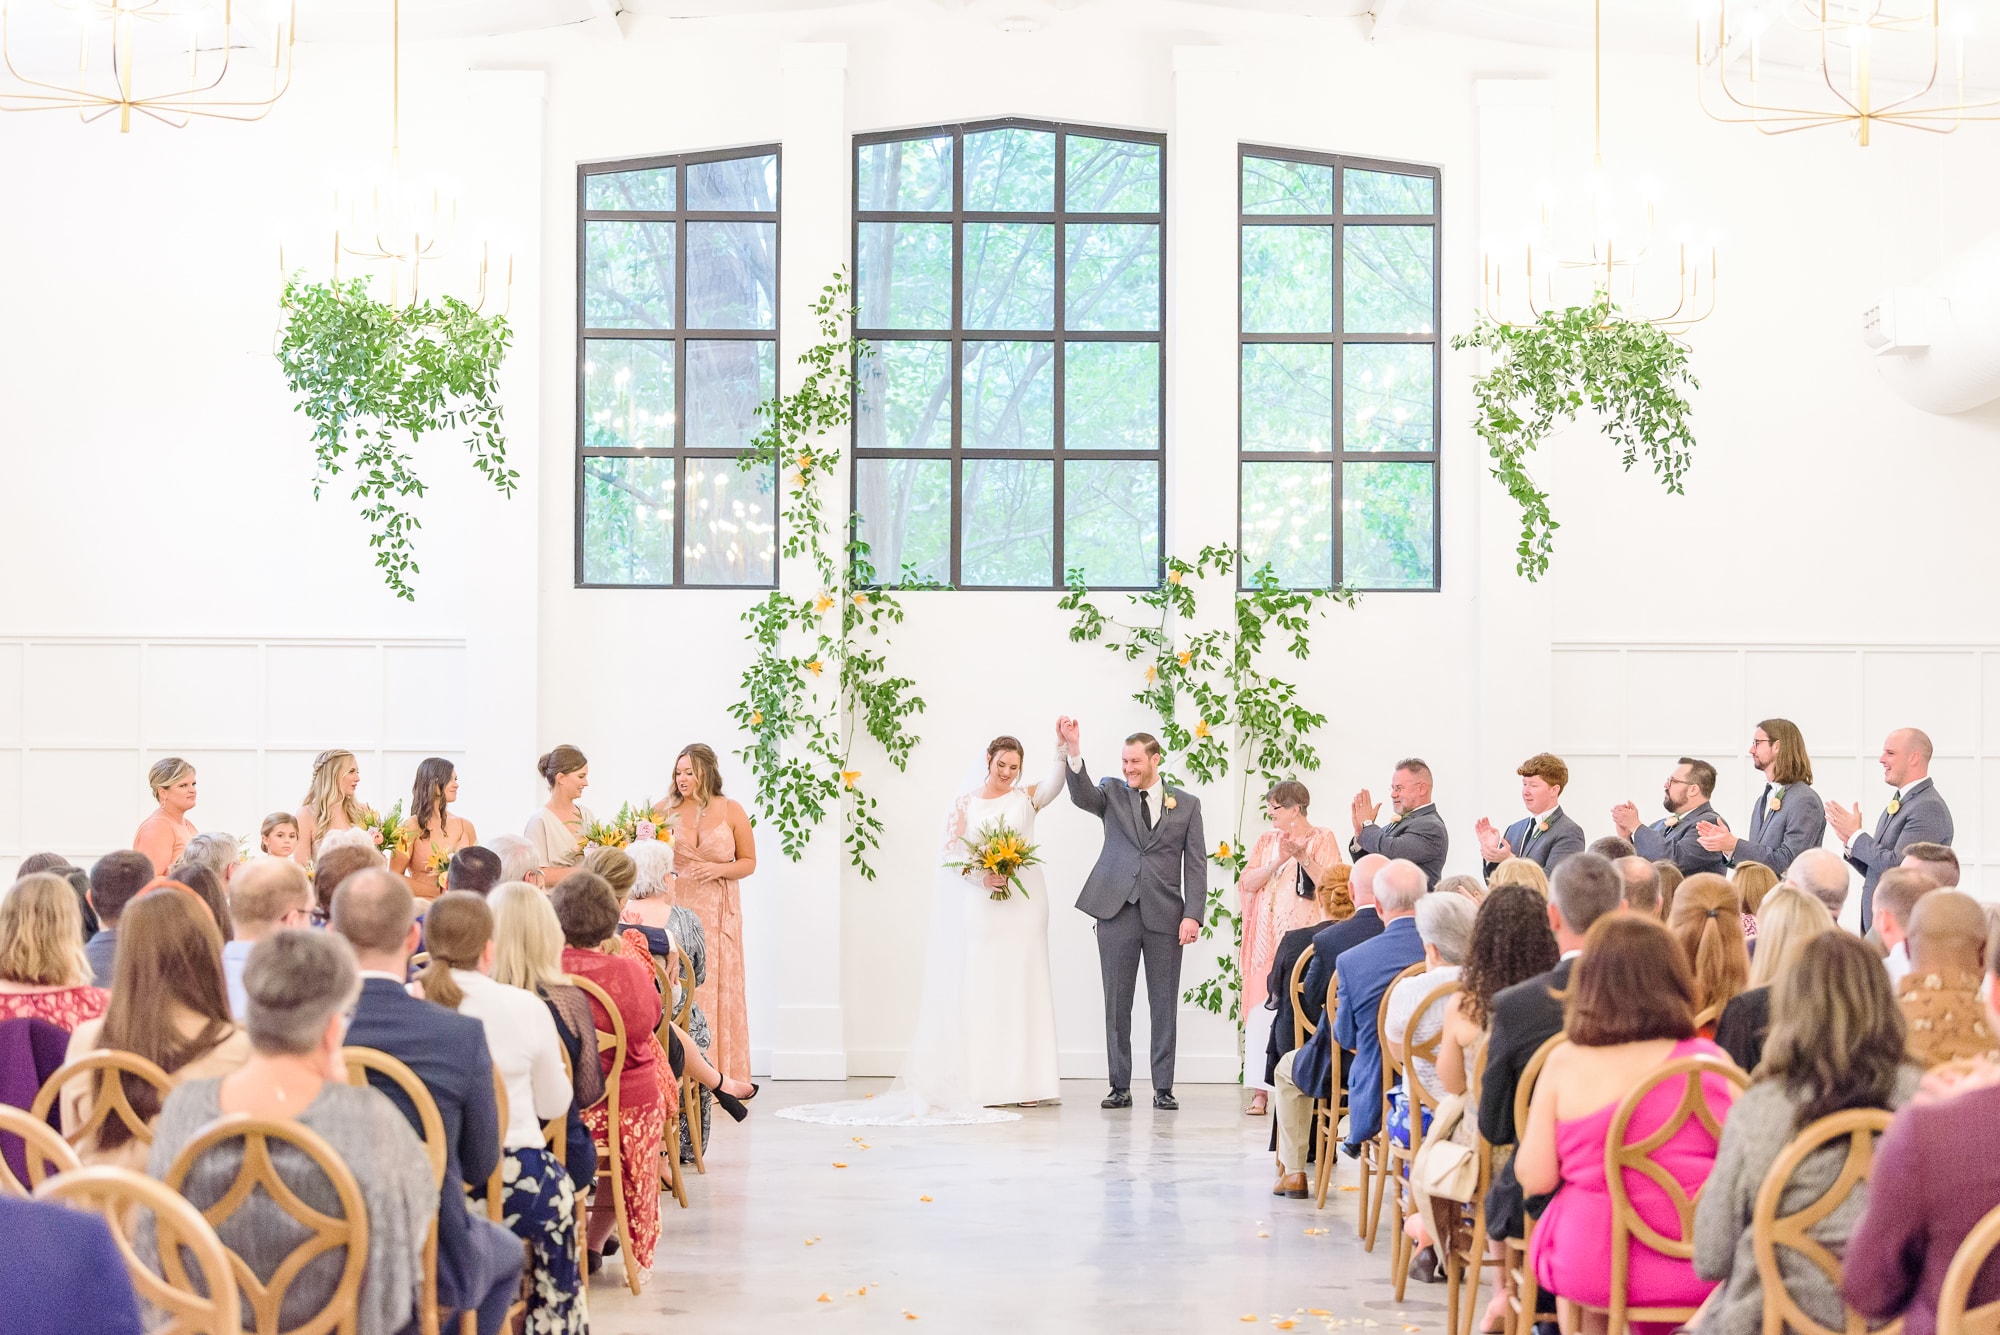 This Garner, NC wedding venue, the Distillery, is perfect for a bright, elegant ceremony like this one.